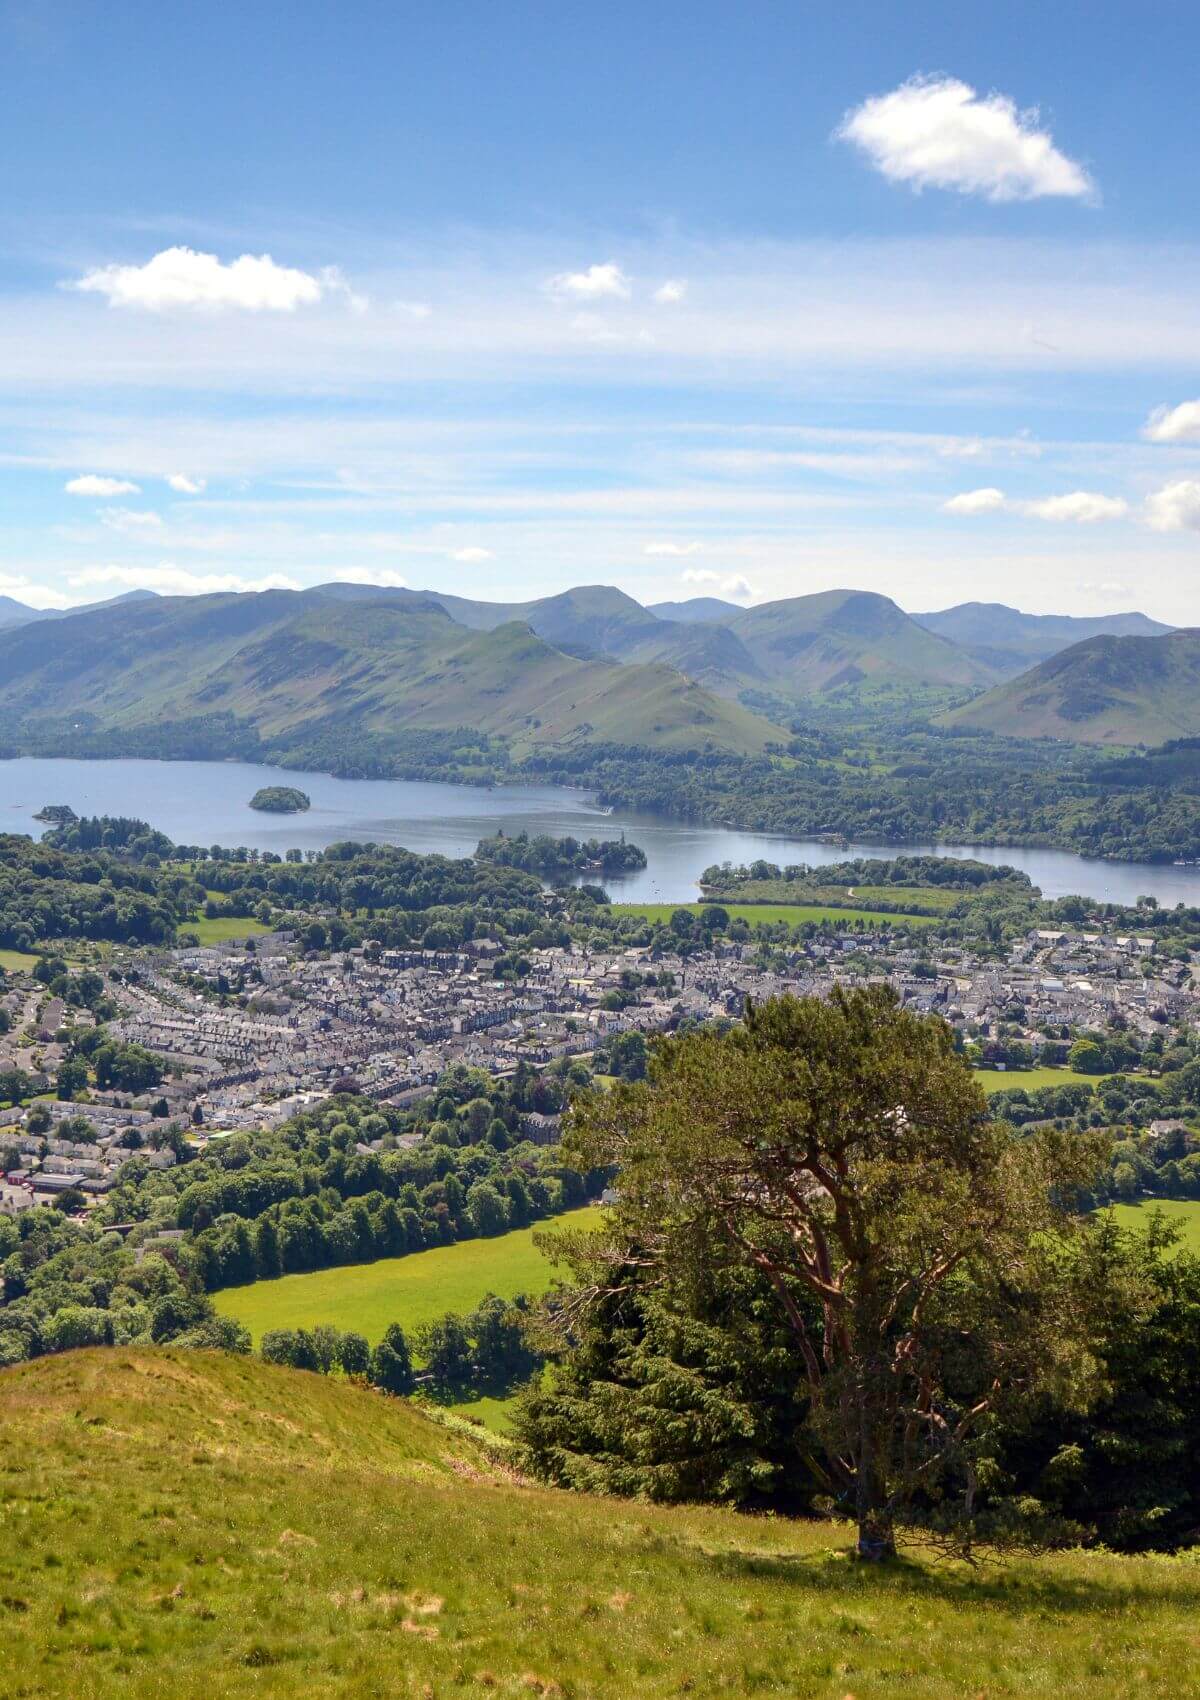 A hike to Latrigg is one of the easiest Lake District walks